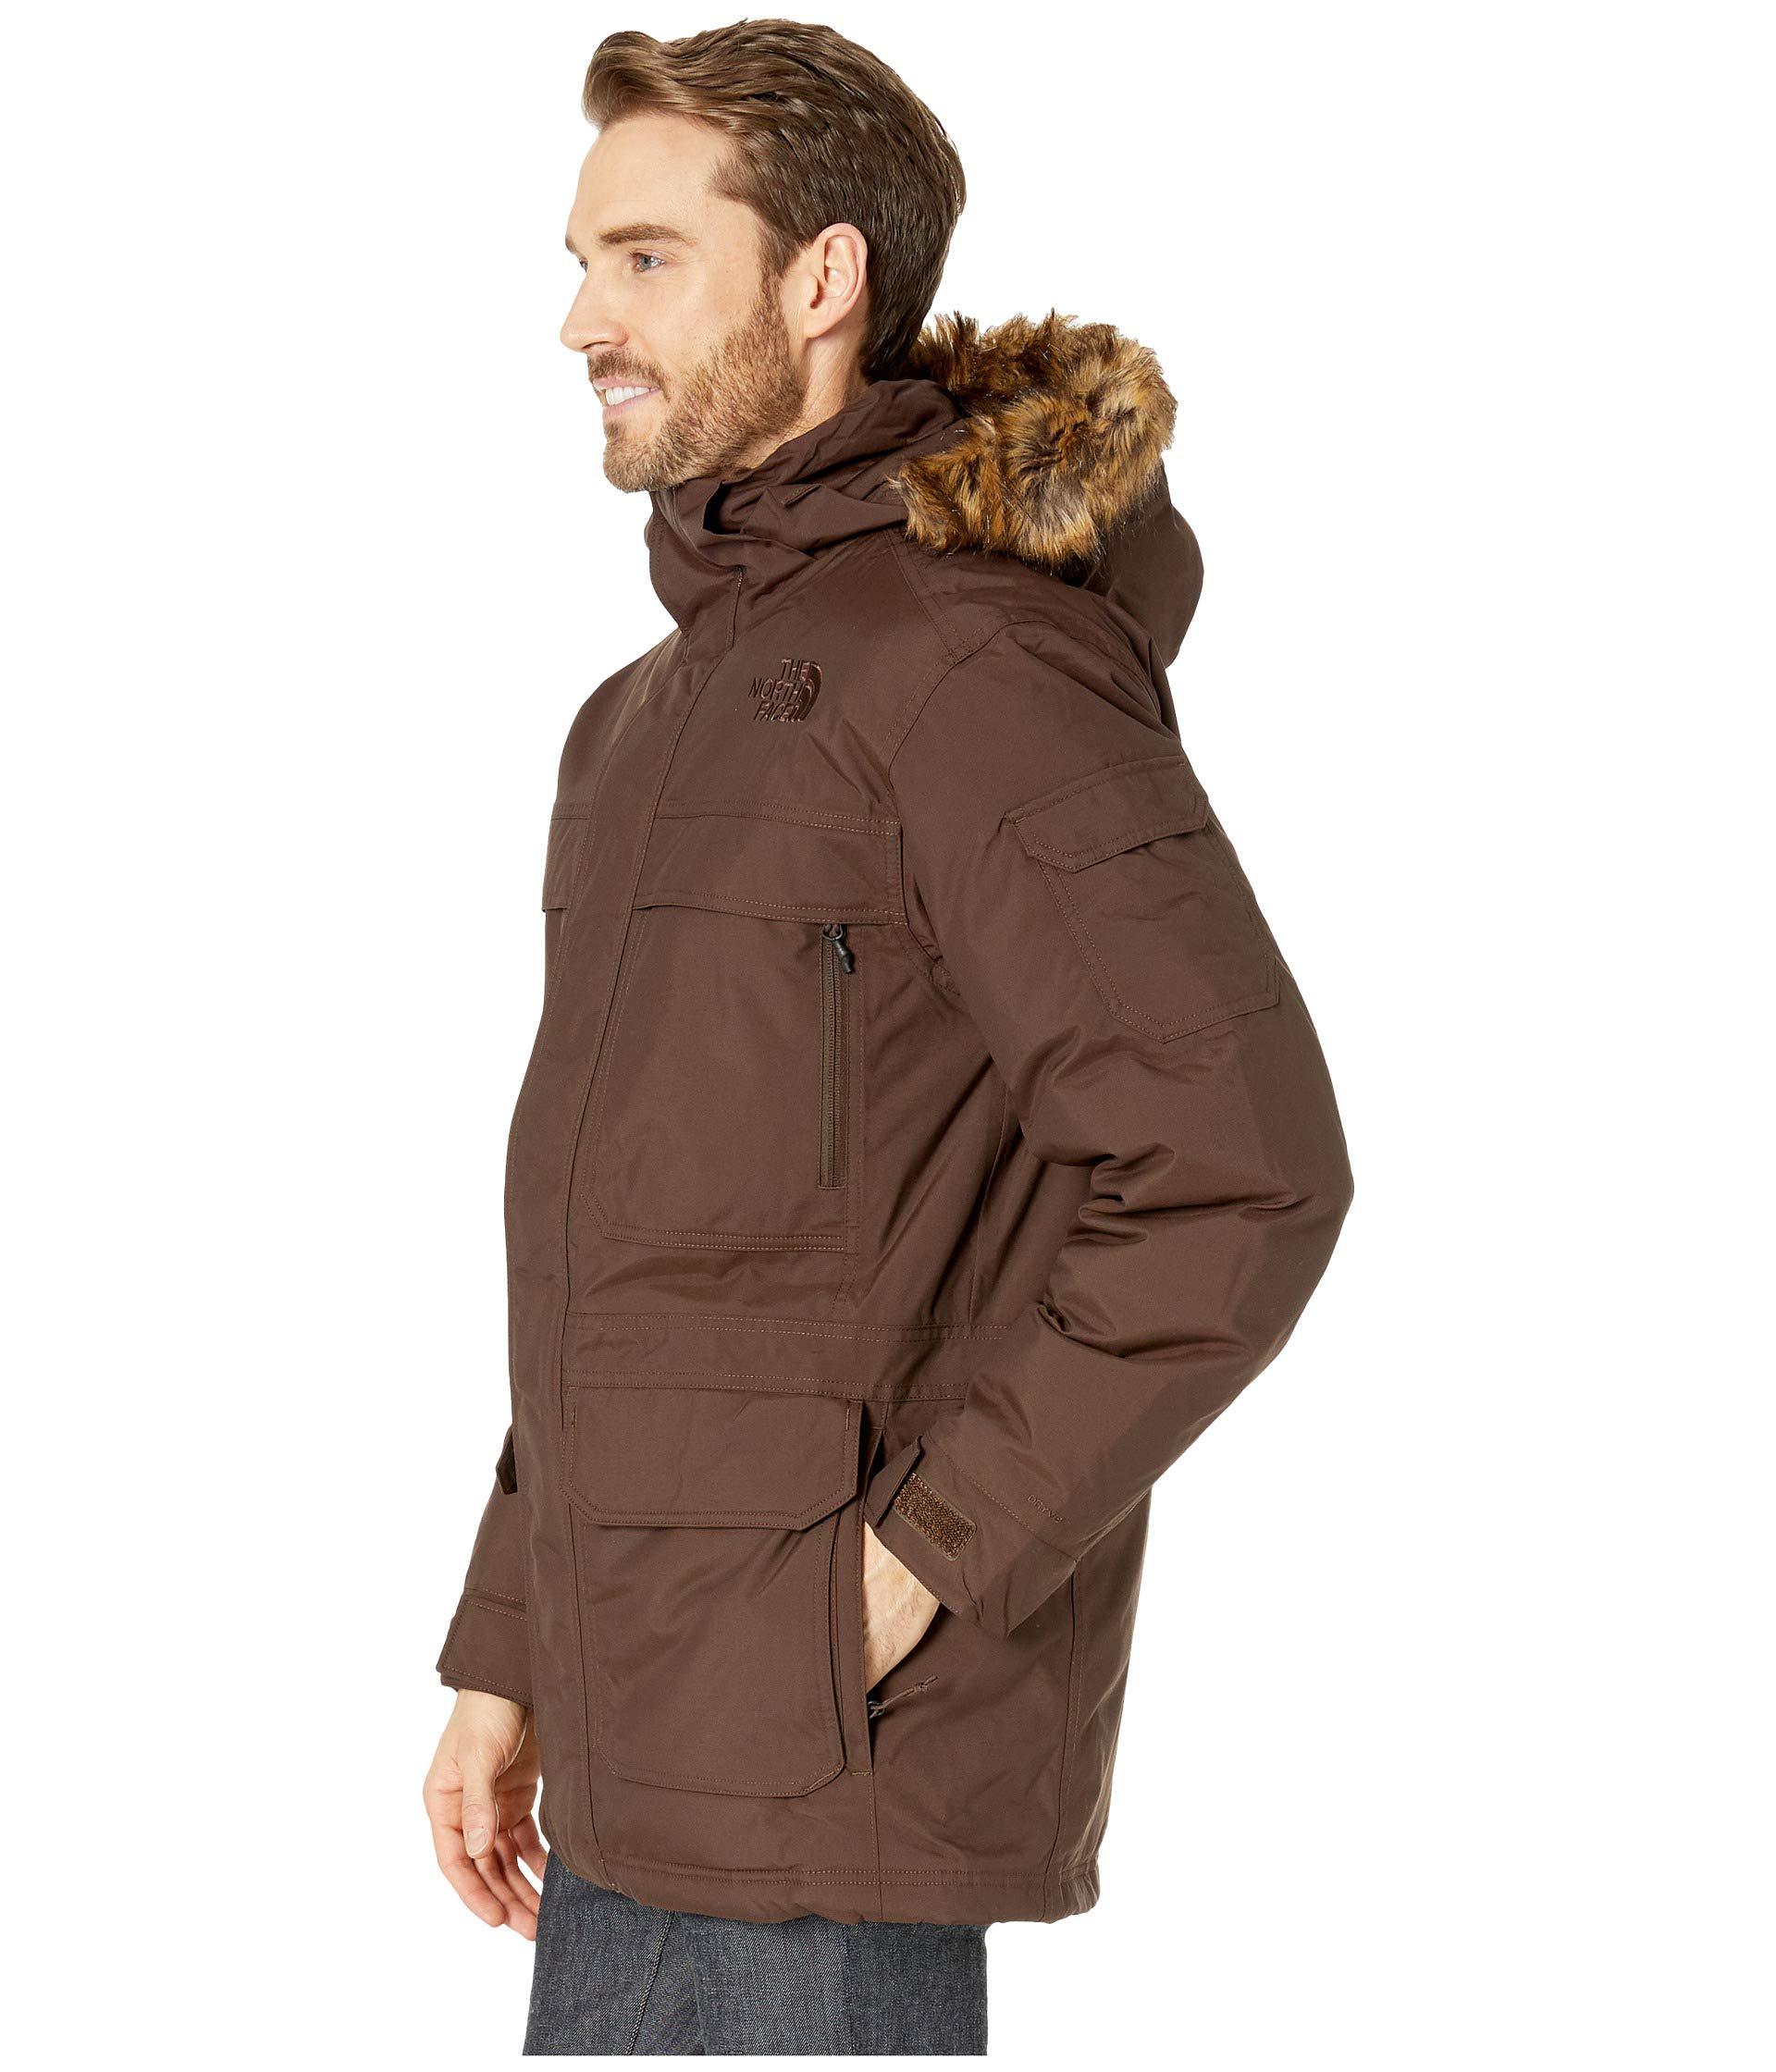 The North Face Synthetic Mcmurdo Parka Iii in Brown for Men - Lyst